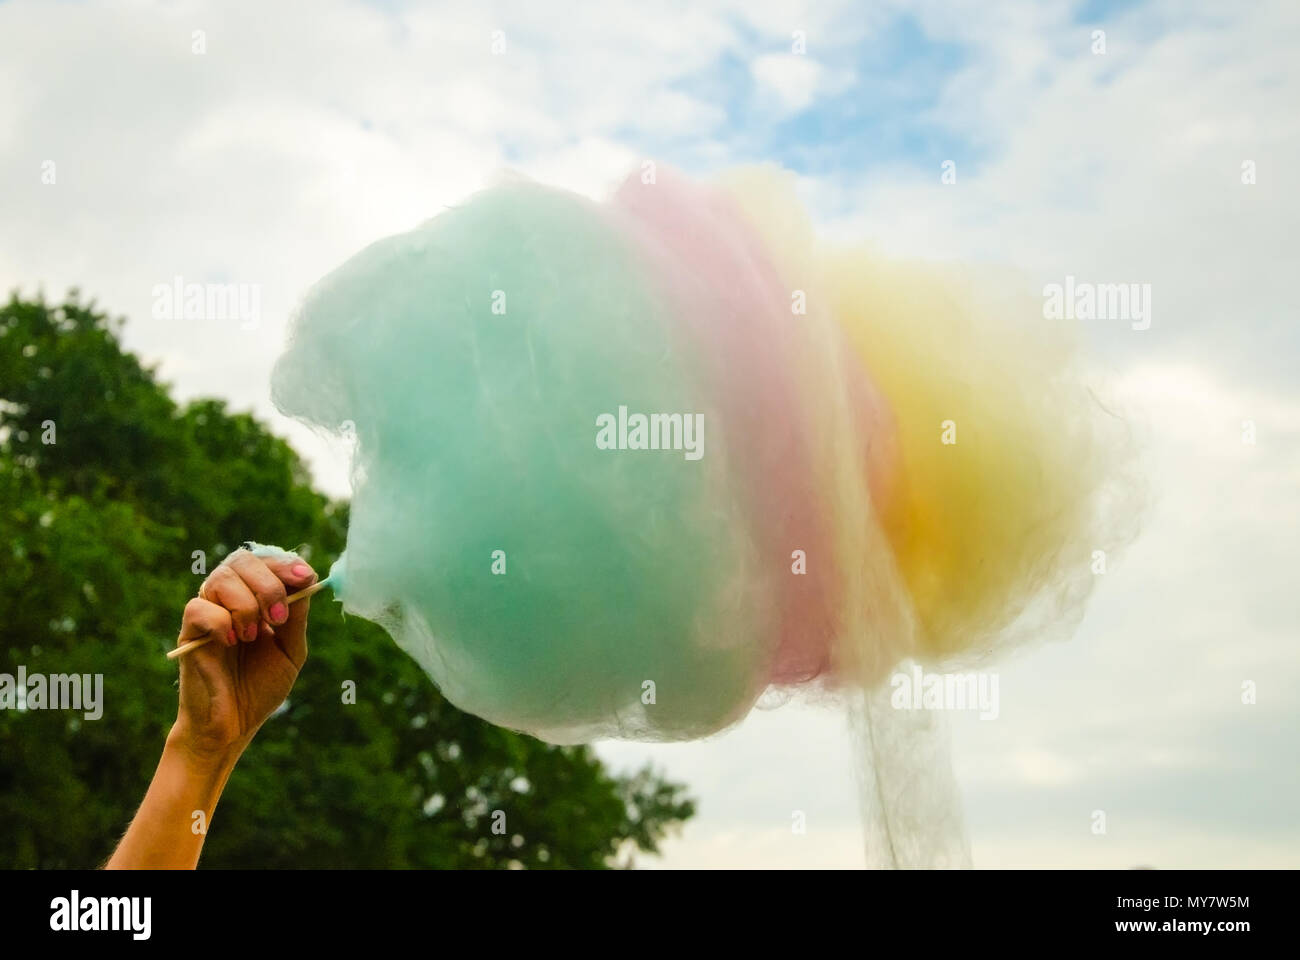 The hand of women holding coloured  cotton candy in the background of the blue sky and green tree Stock Photo